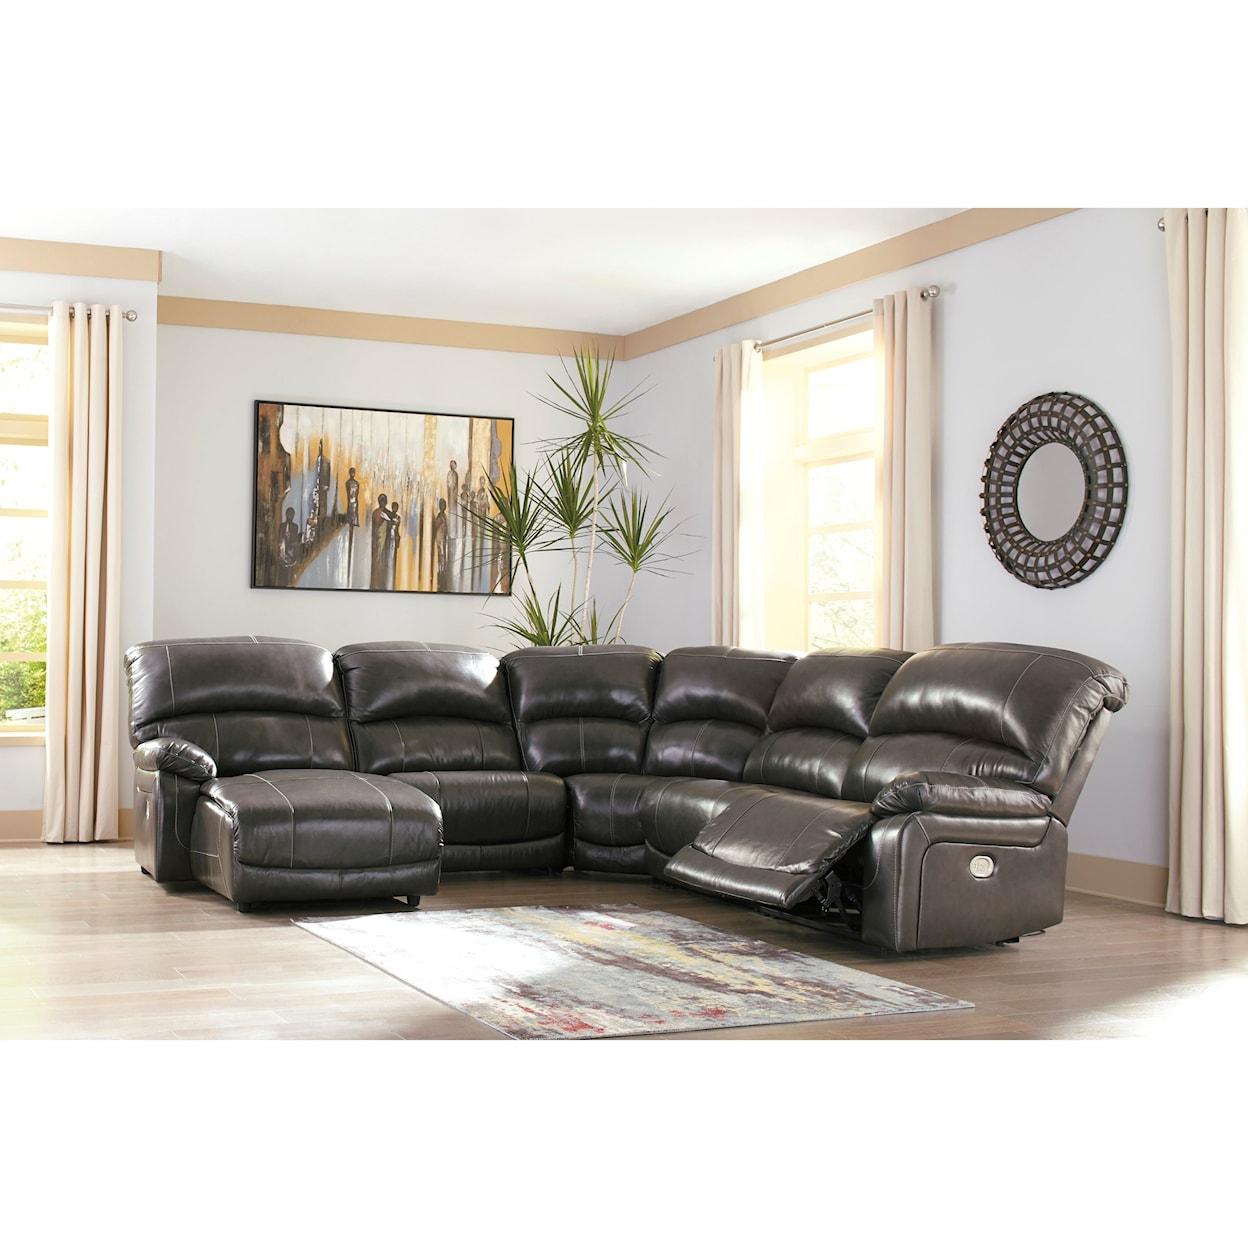 Signature Design by Ashley Hallstrung Power Reclining Sectional